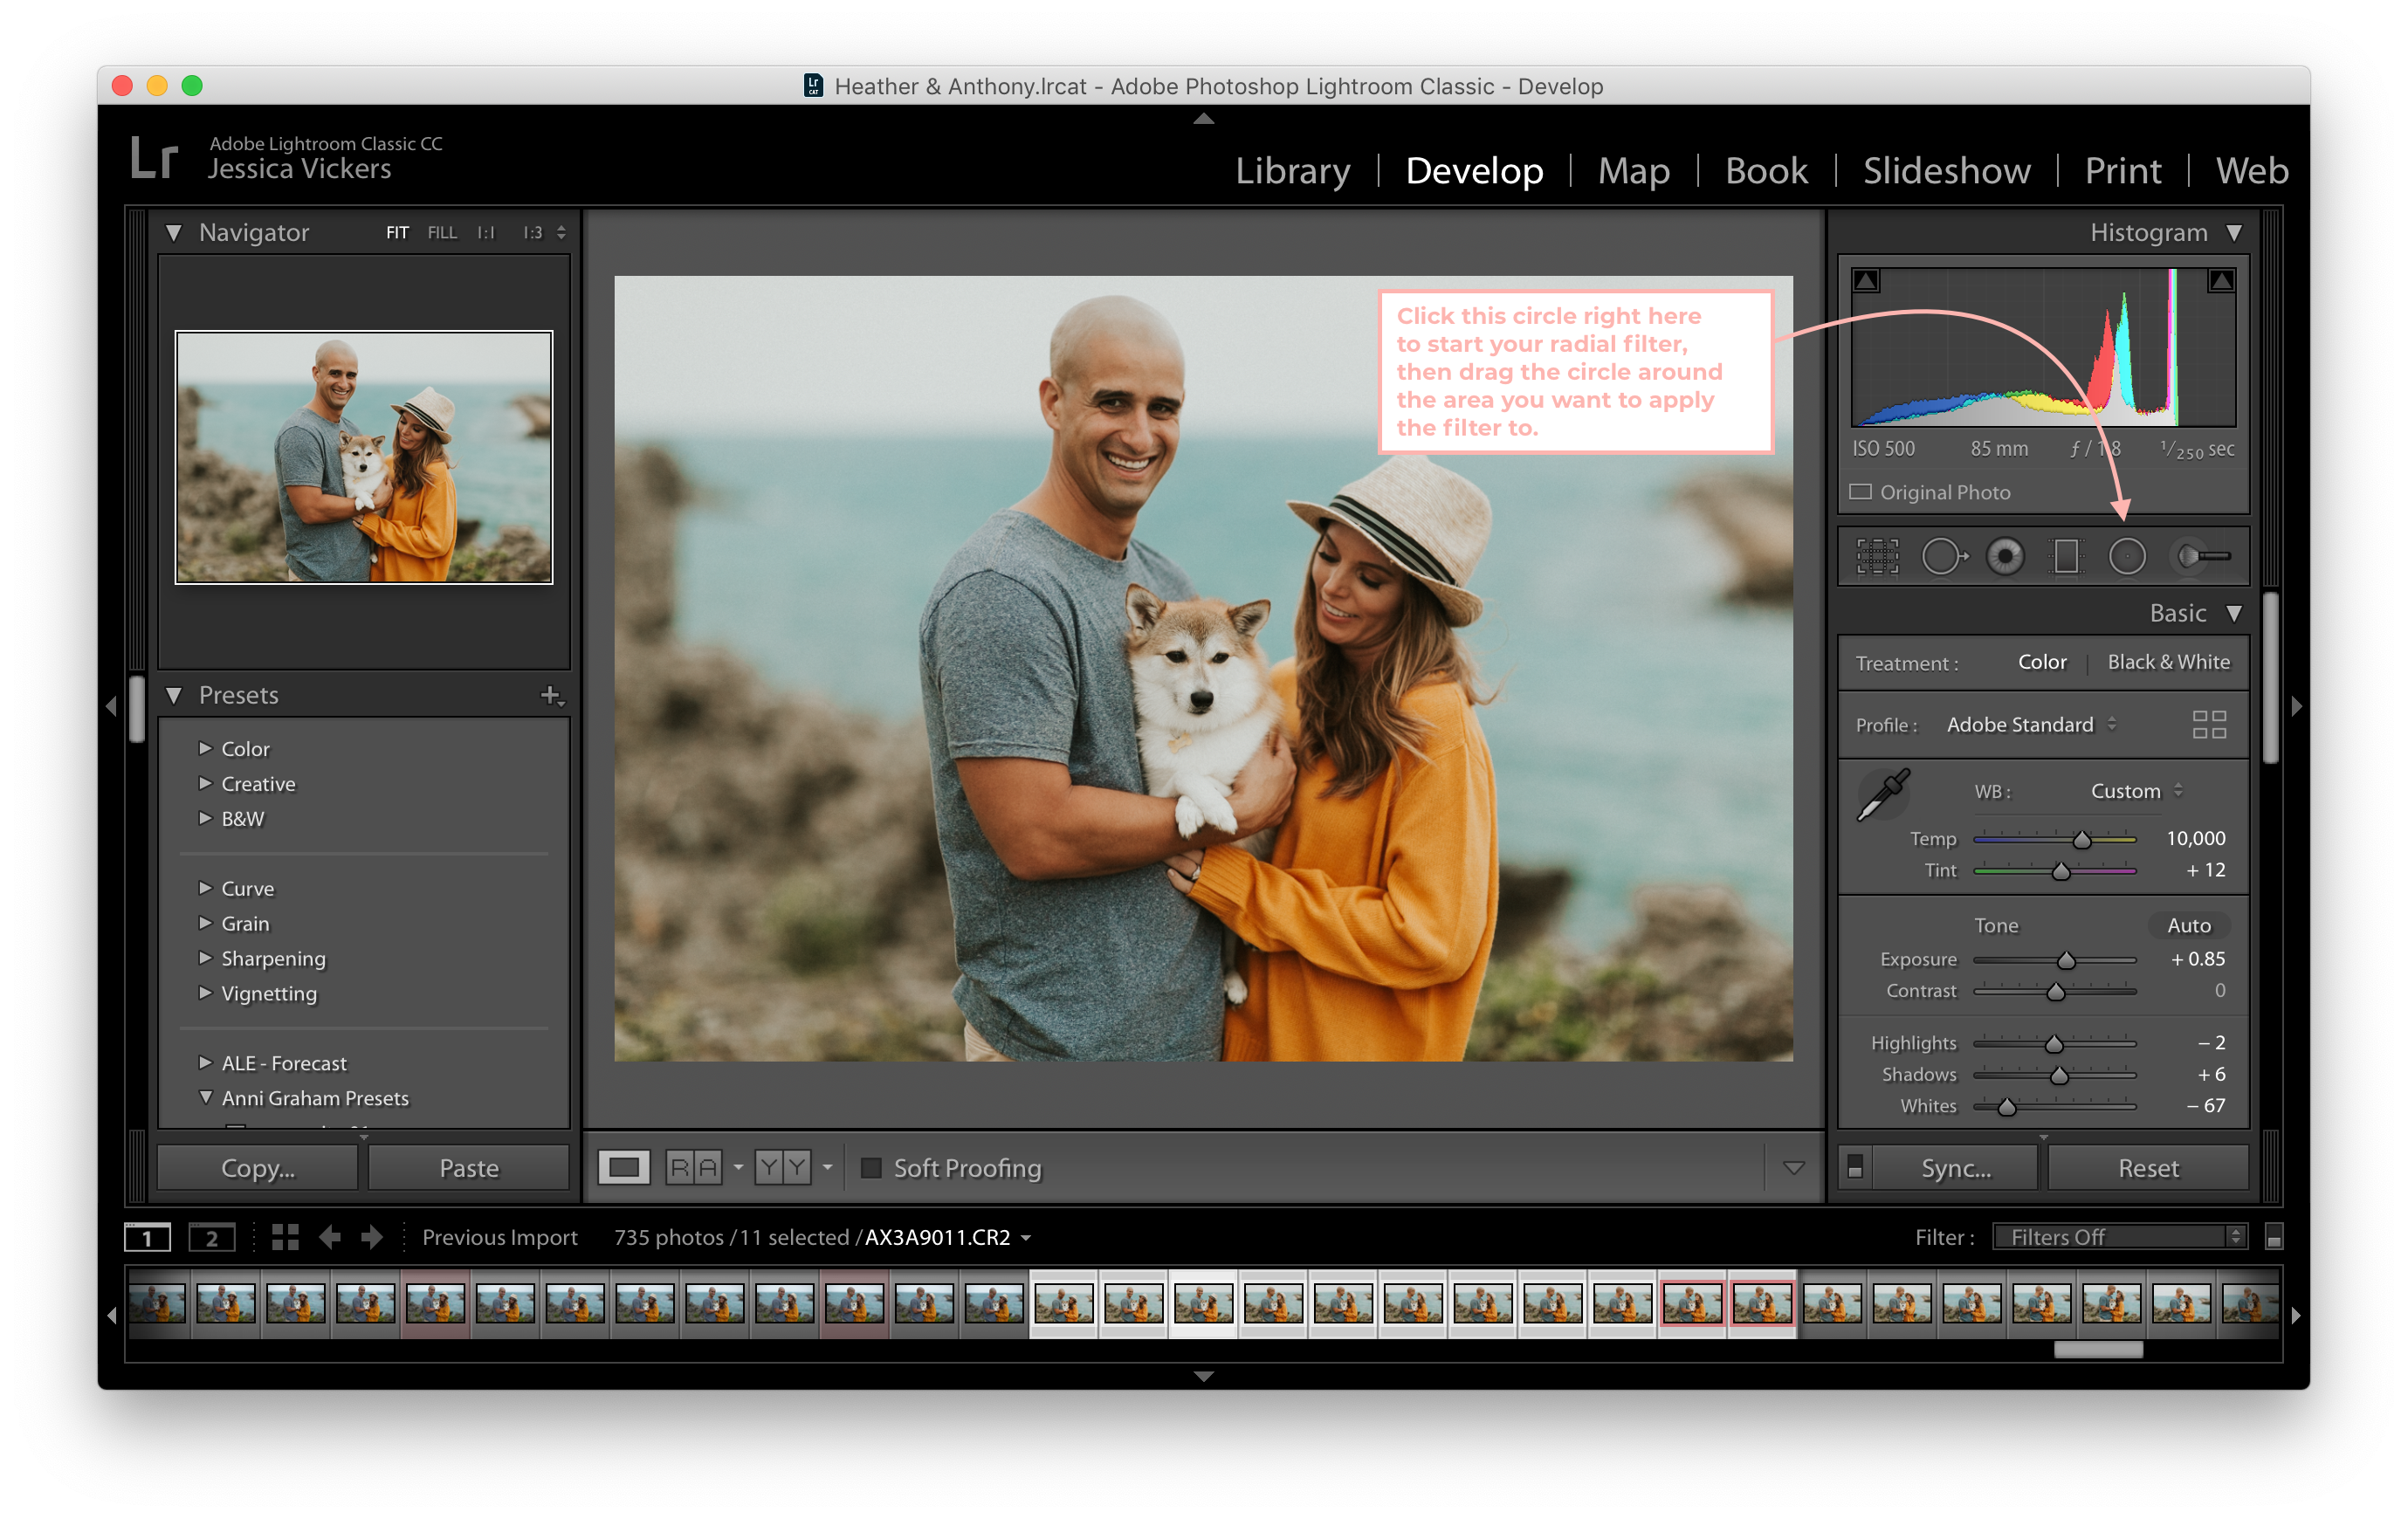 Feel like there's stuff in Lightroom you're missing? Tools that could make your editing workflow better? Here are 5 Lightroom tools you should be using.